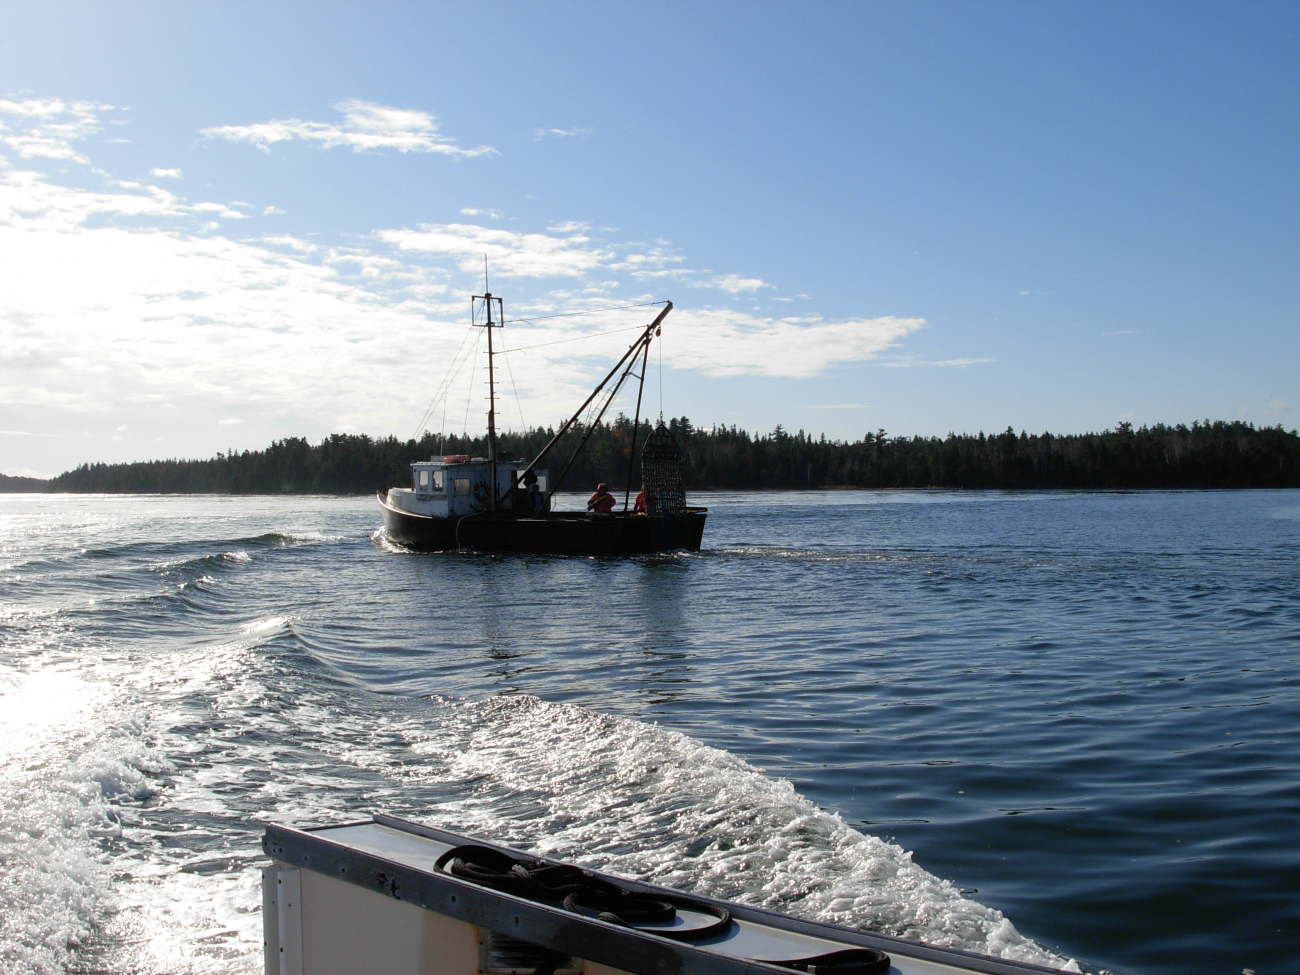 Clam dredger EMPTY POCKETS seen operating in Passamaquoddy Bay area